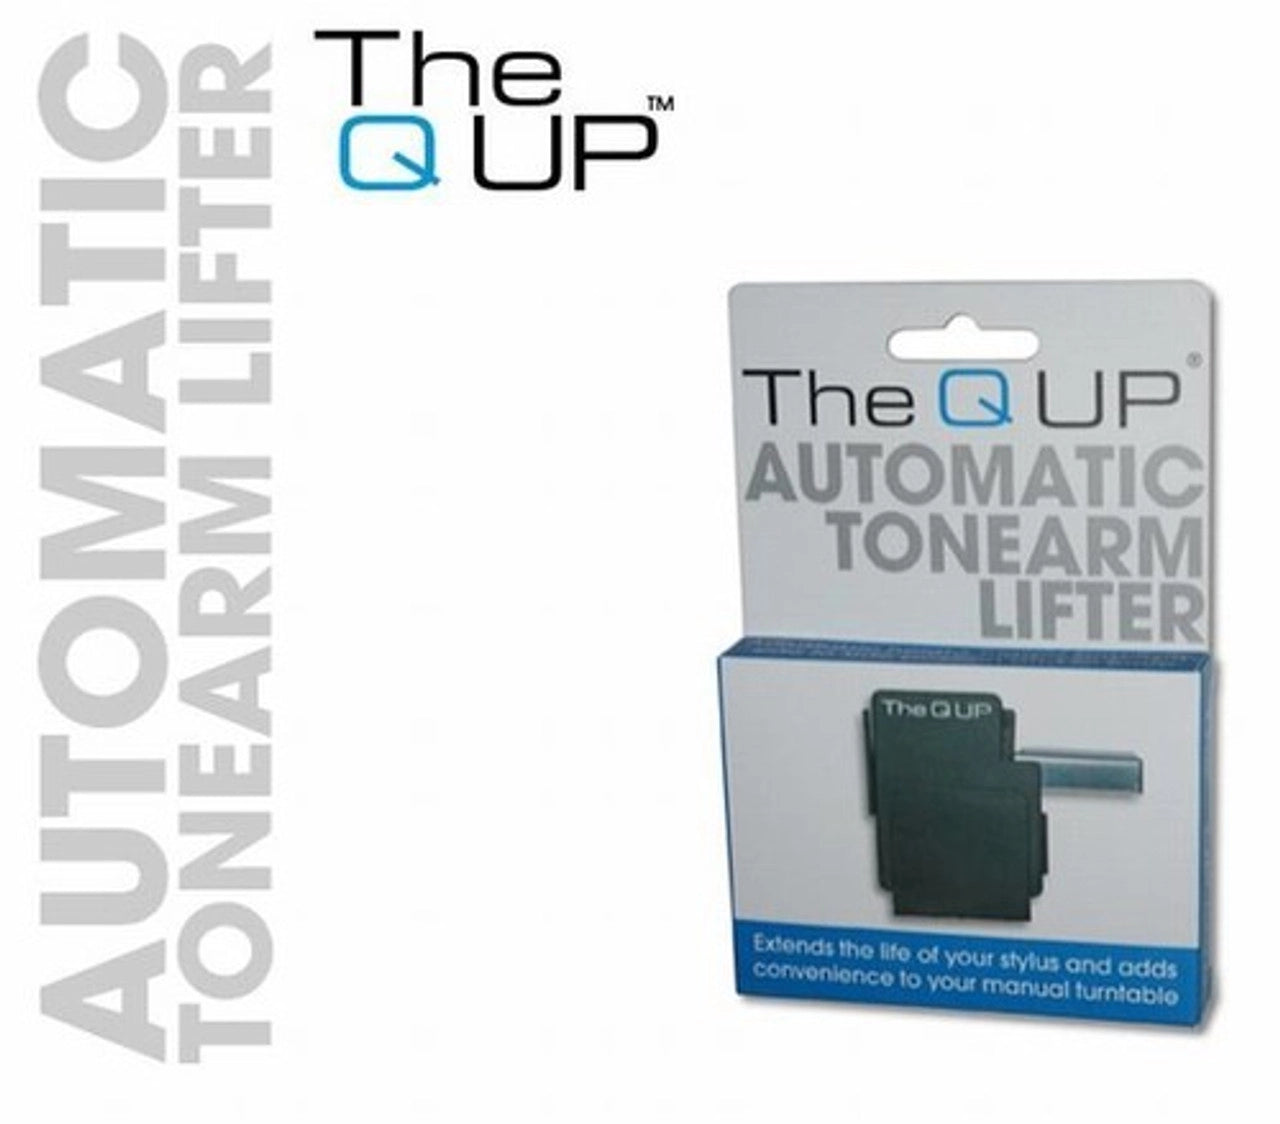 The Q-Up - Automatic Tonearm Lifter